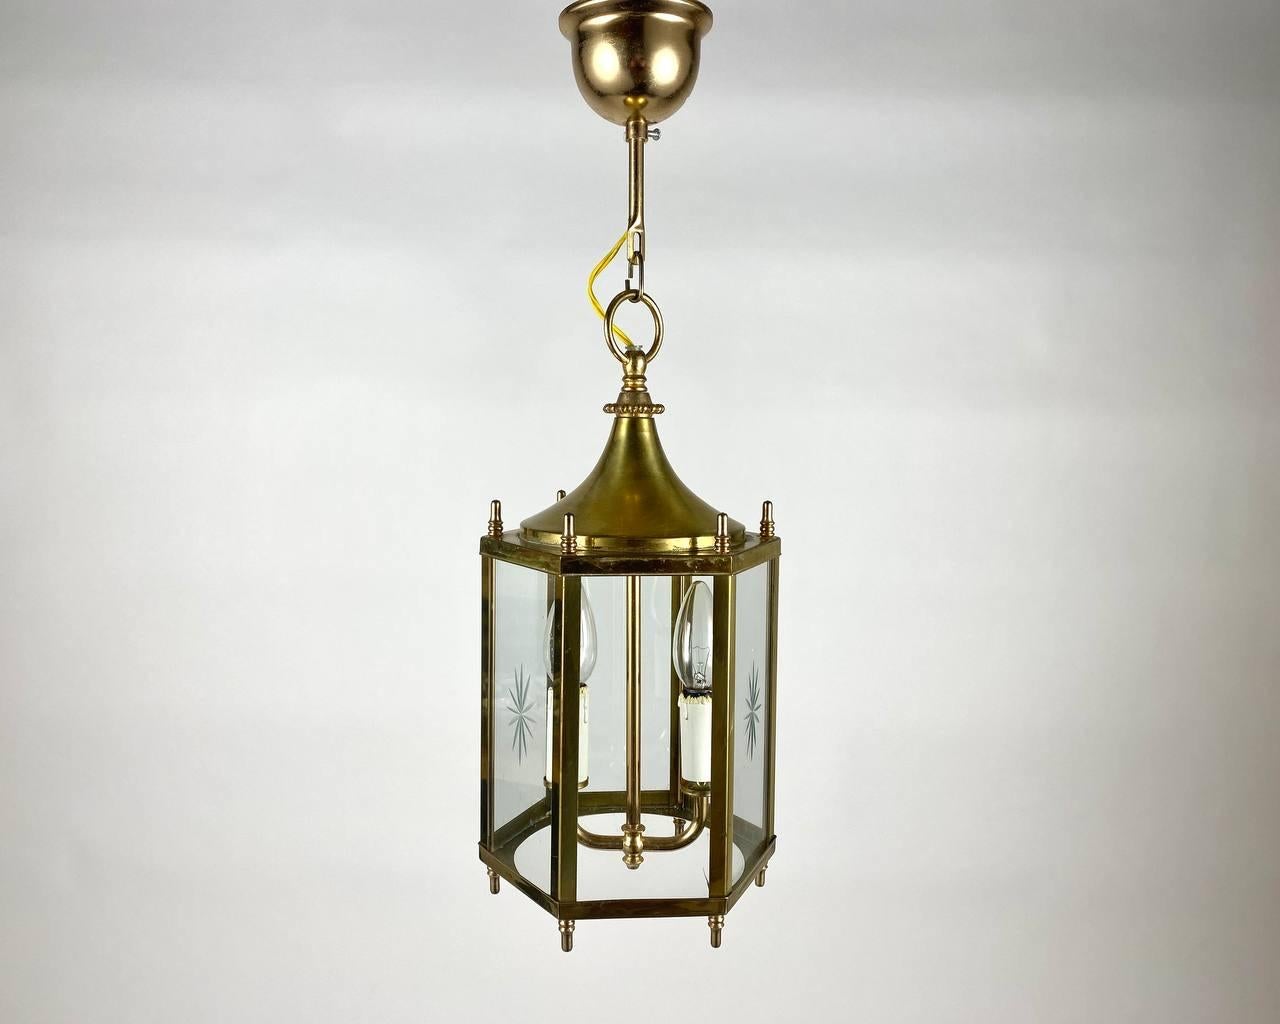 Vintage handcrafted chandelier- lantern for two light points made in 1970-1980s. 

A chandelier from the manufacturer is an amazing combination of warranty from the manufacturer and the design of the lighting fixture.

The hexagonal shade comes